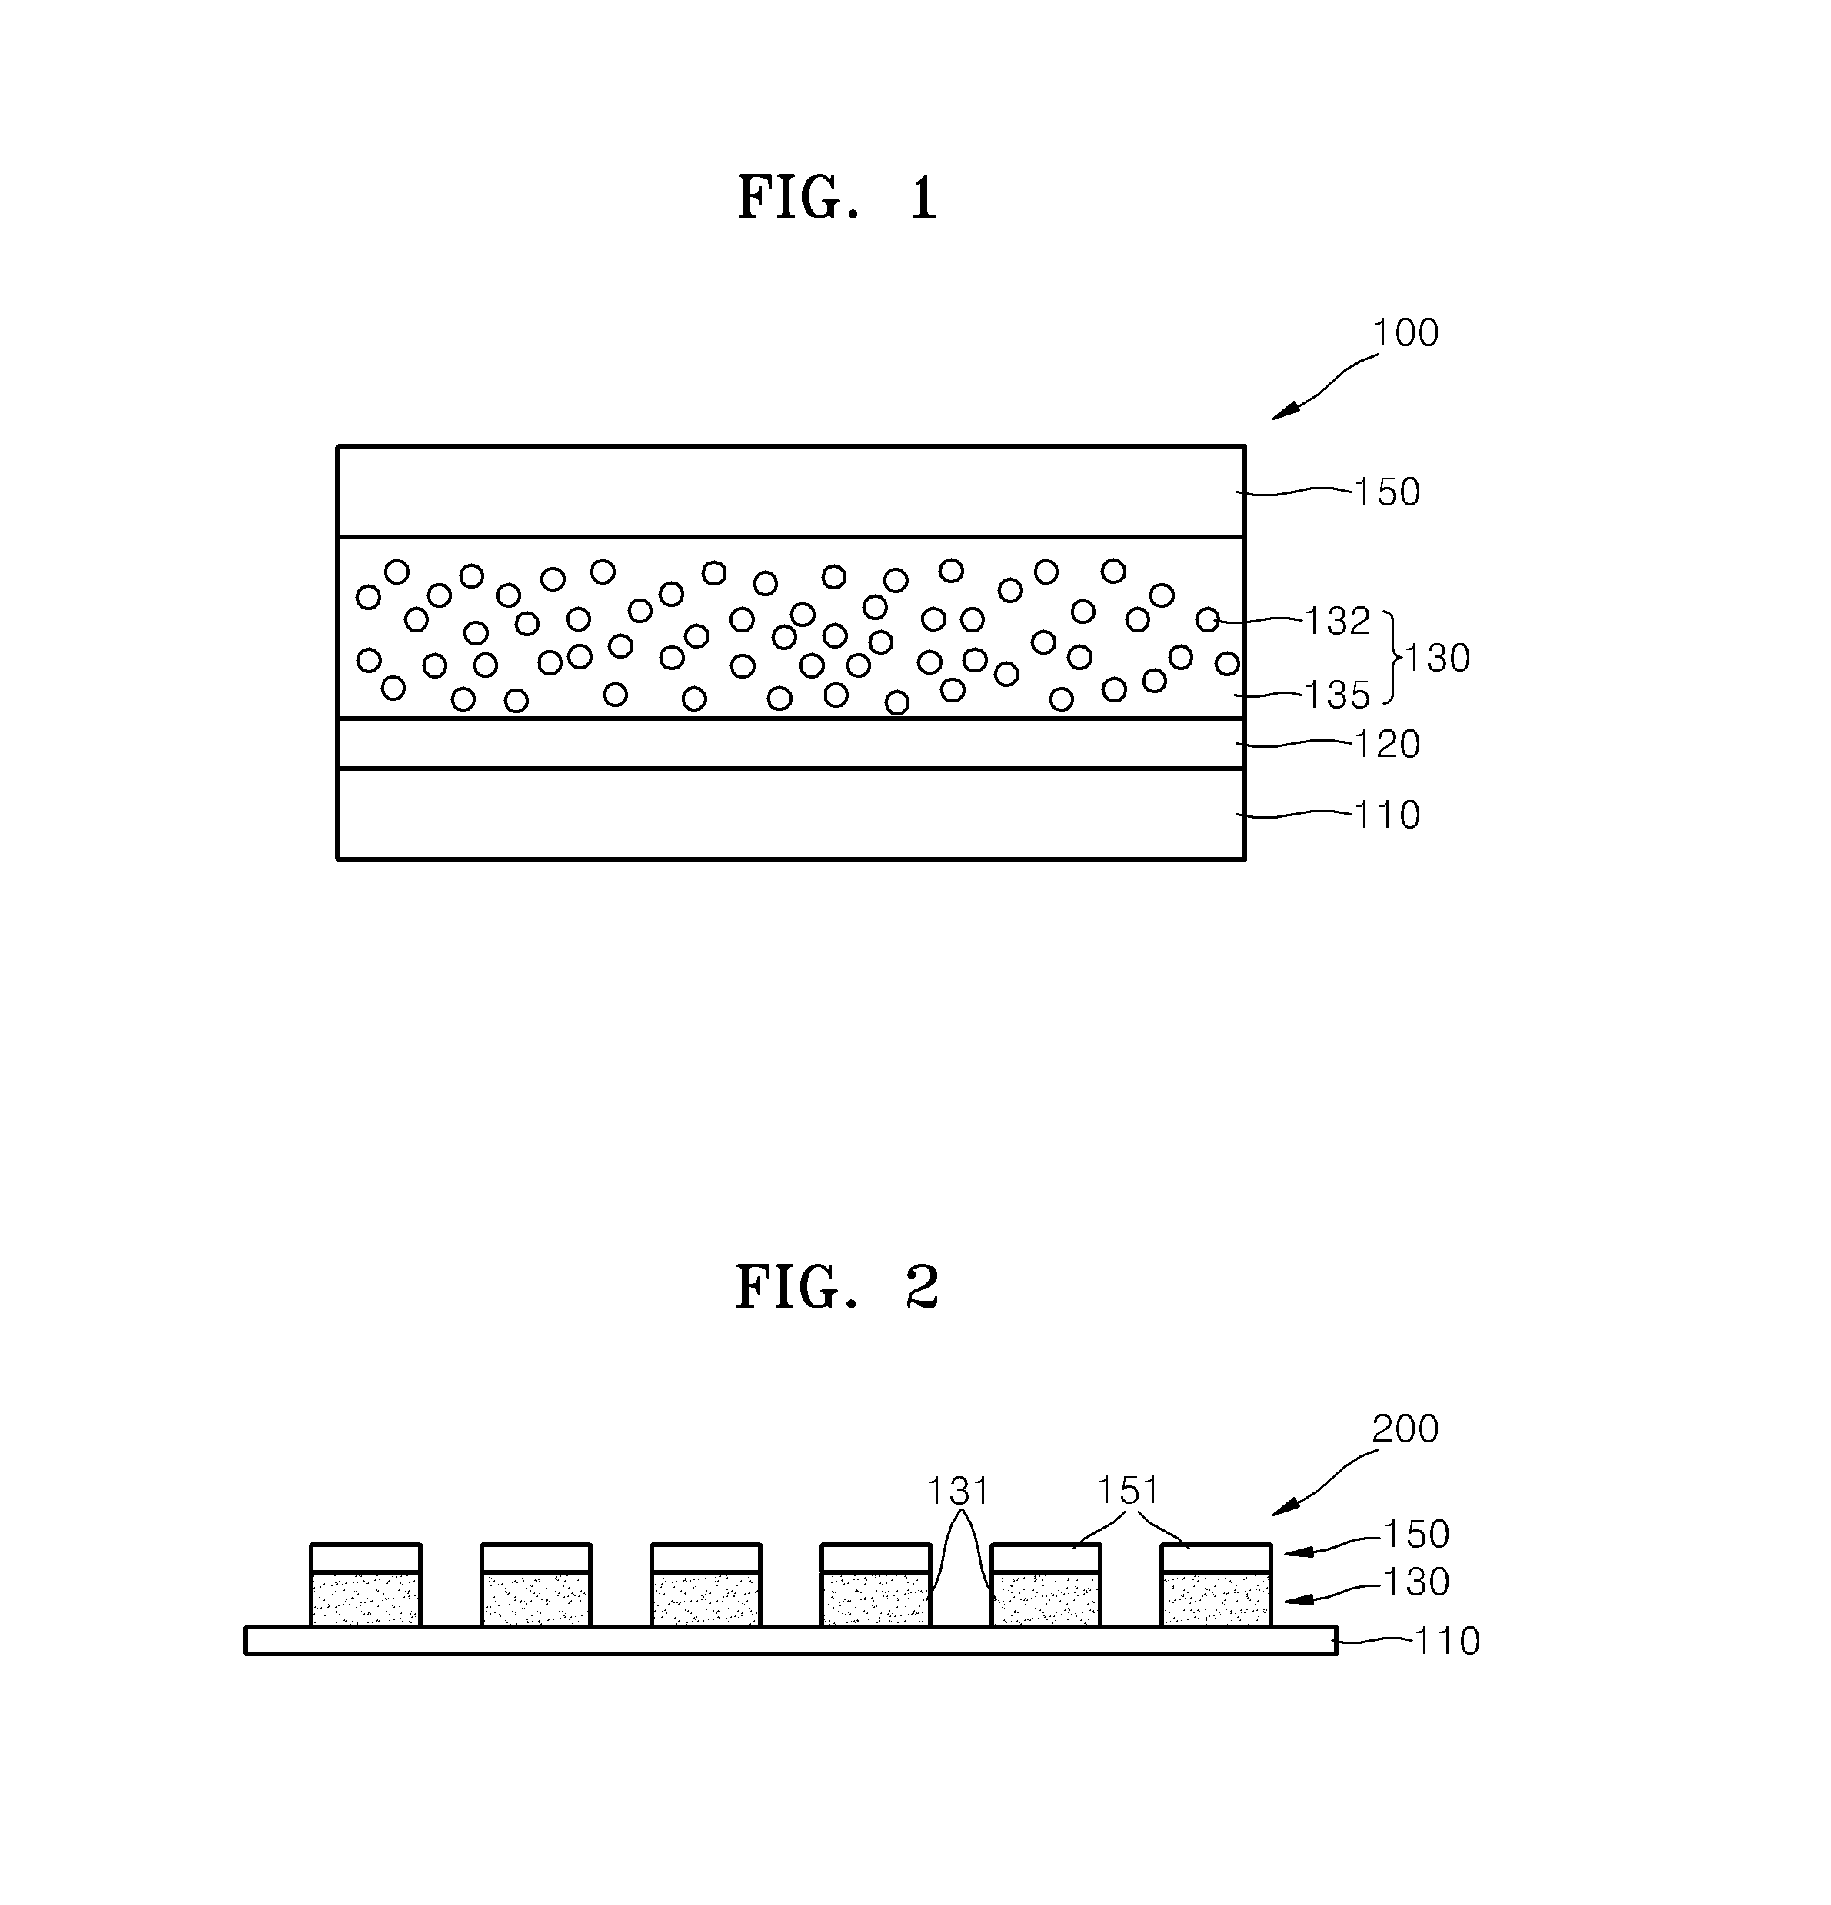 Phosphor film, method of forming the same, and method of coating phosphor layer on LED chips